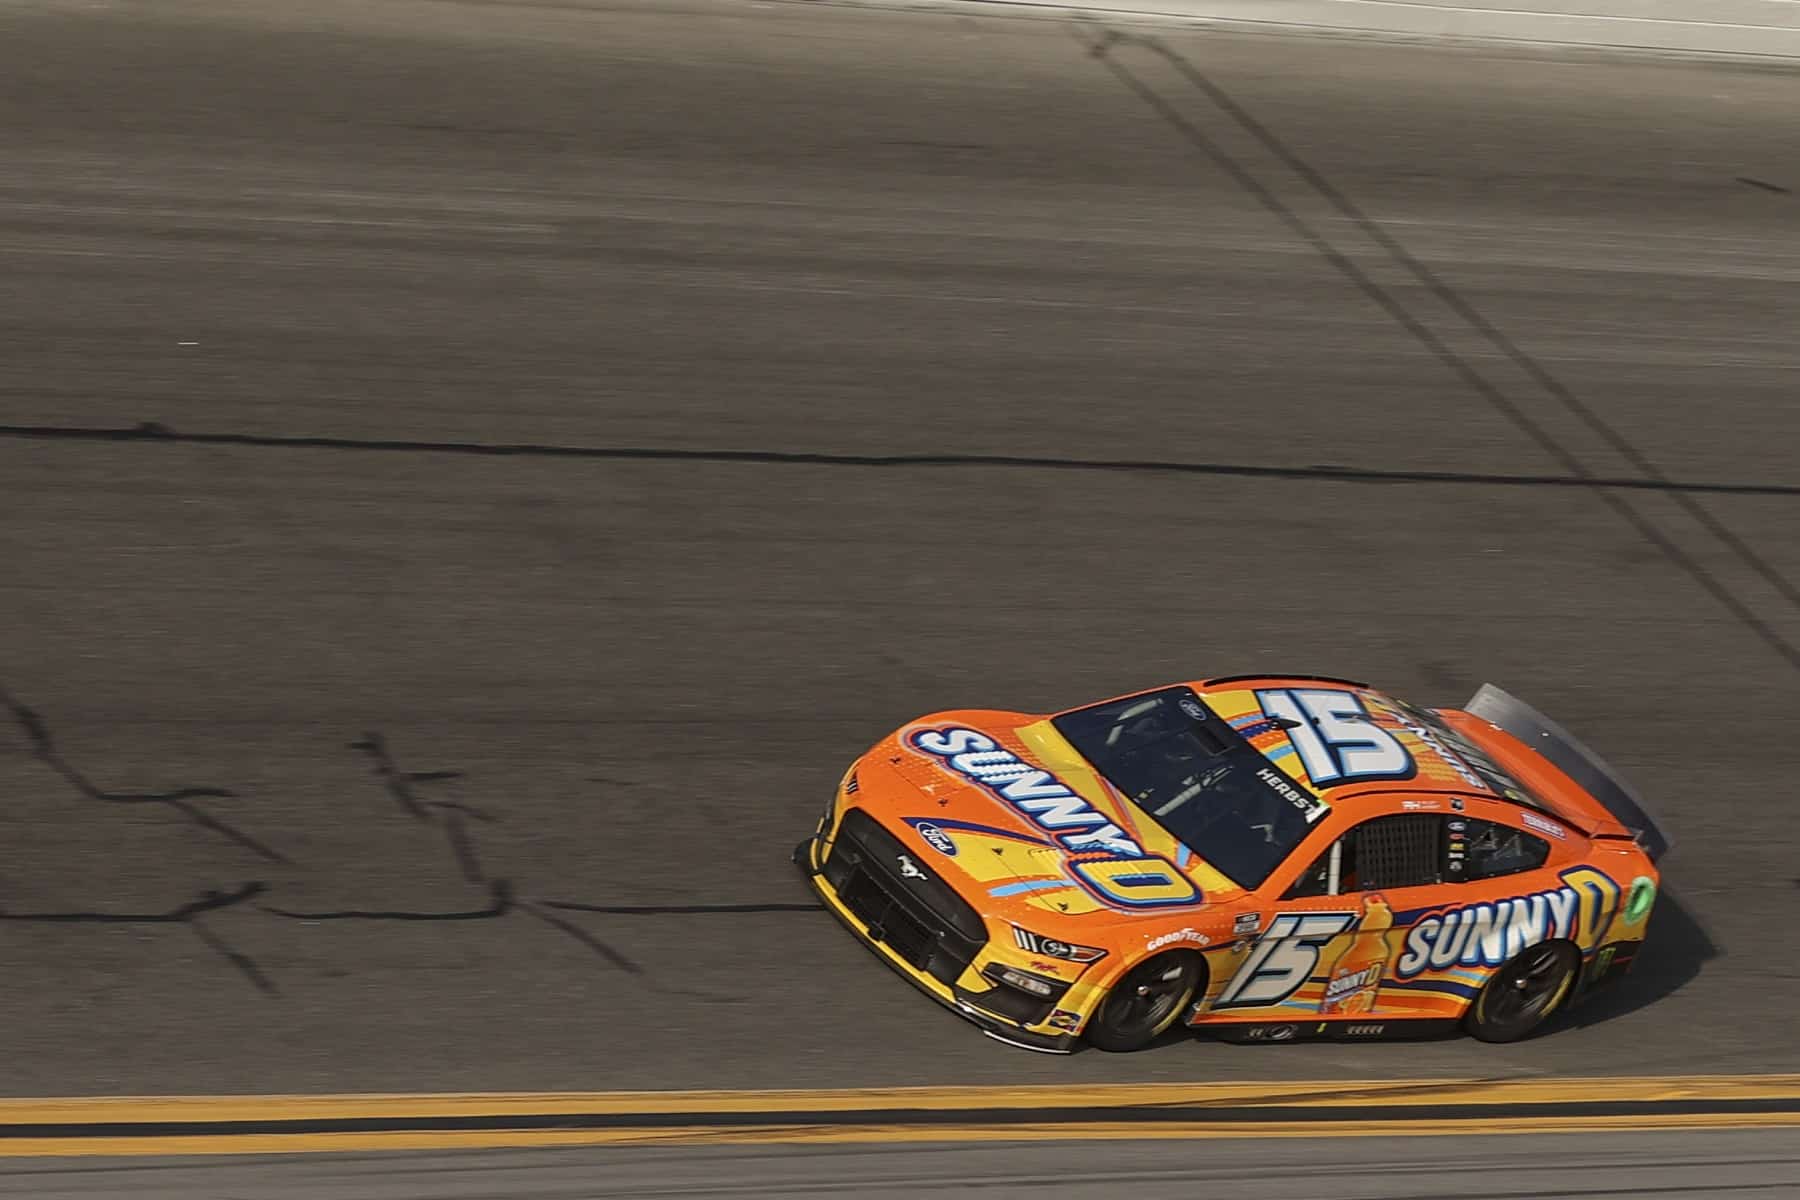 Riley Herbst finished 10th in Sunday's Daytona 500.